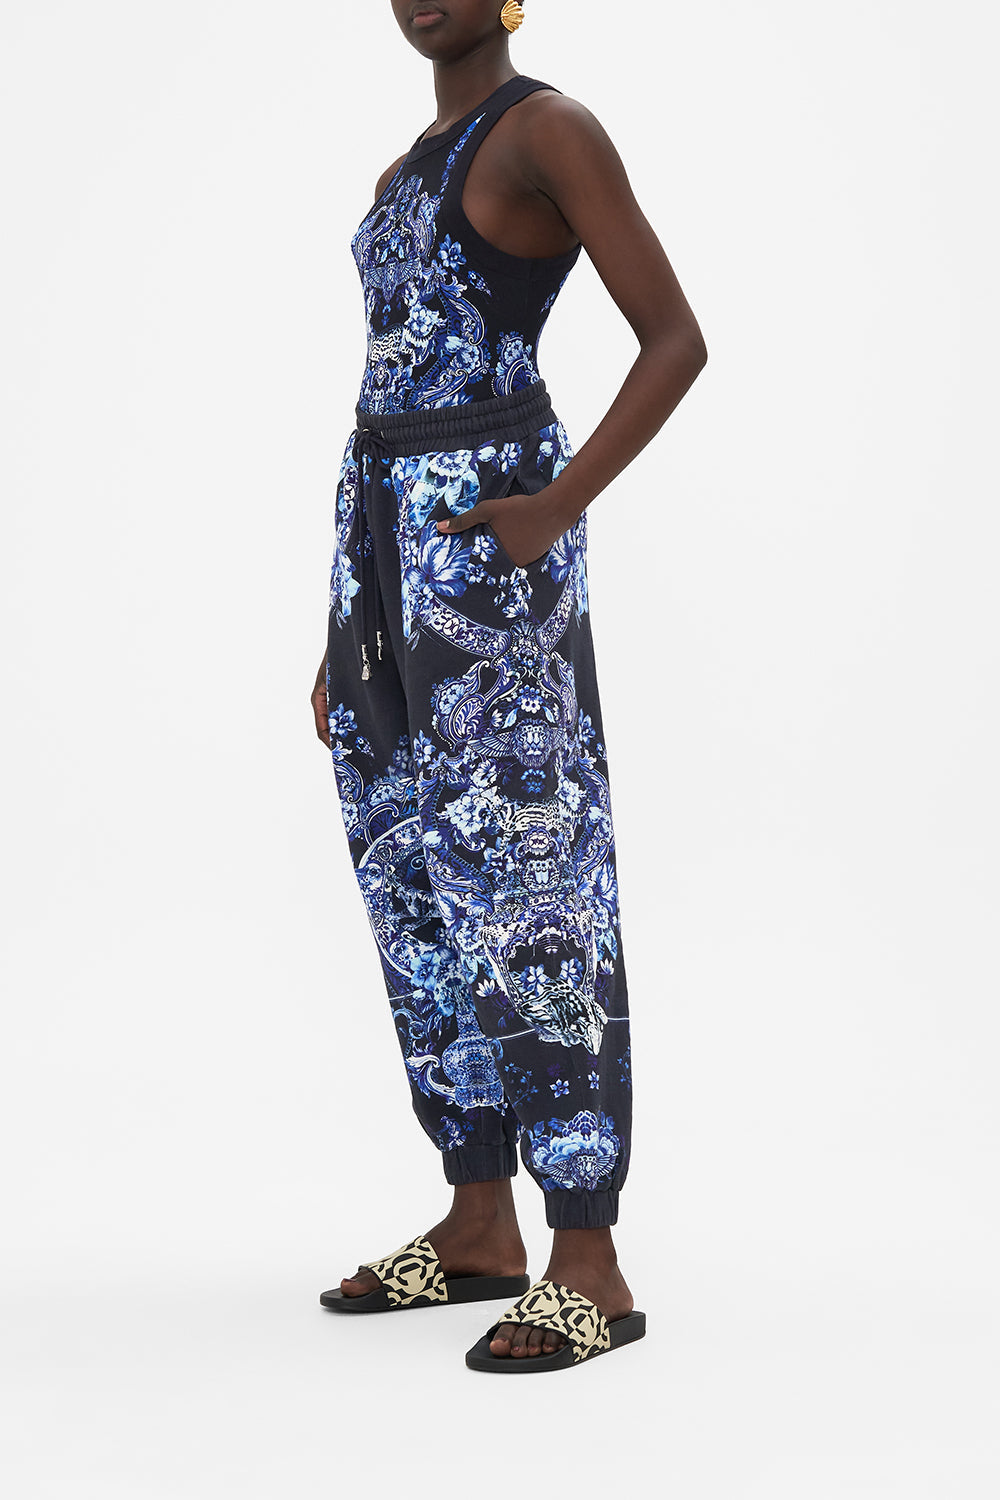 Side view of model wearing CAMILLA designer track pants in Delft Dynasty print 